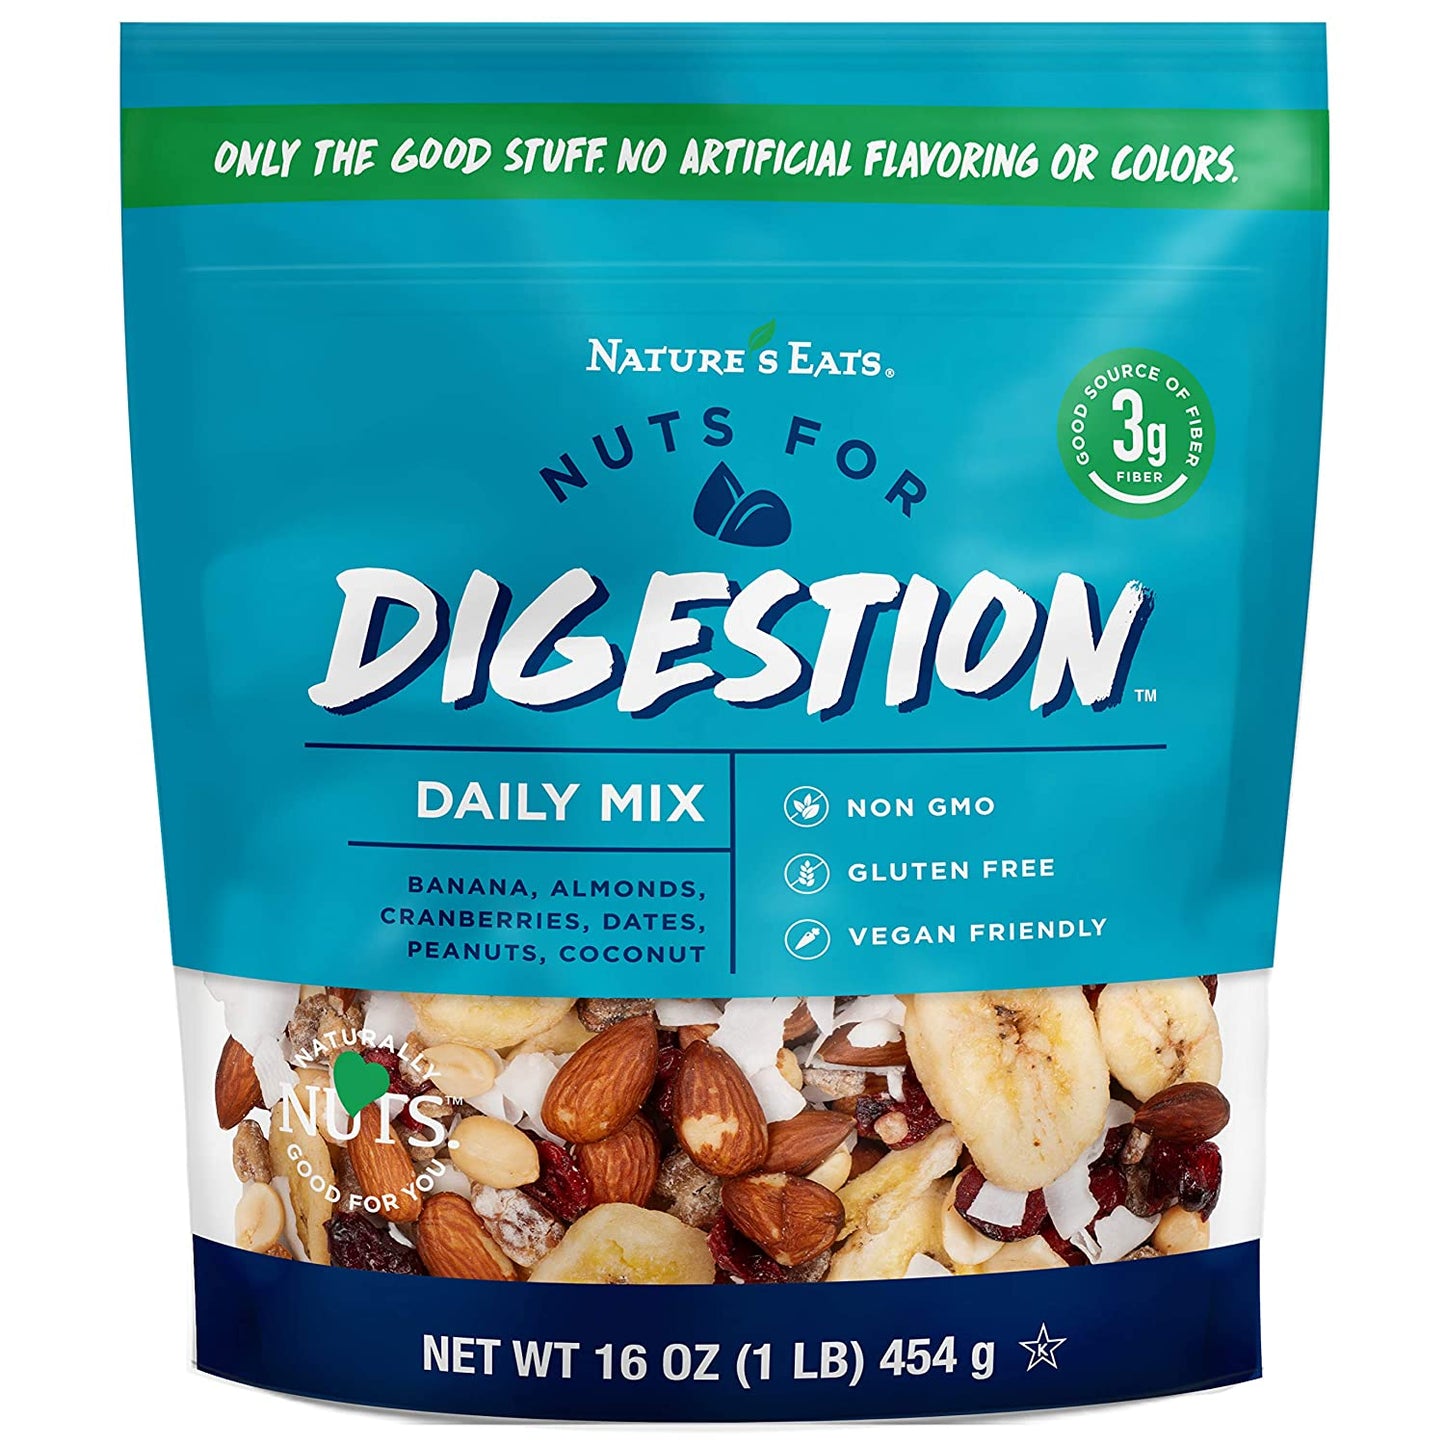 Nature's Eats Nuts for Digestion Daily Banana trail mix, 16 Ounce